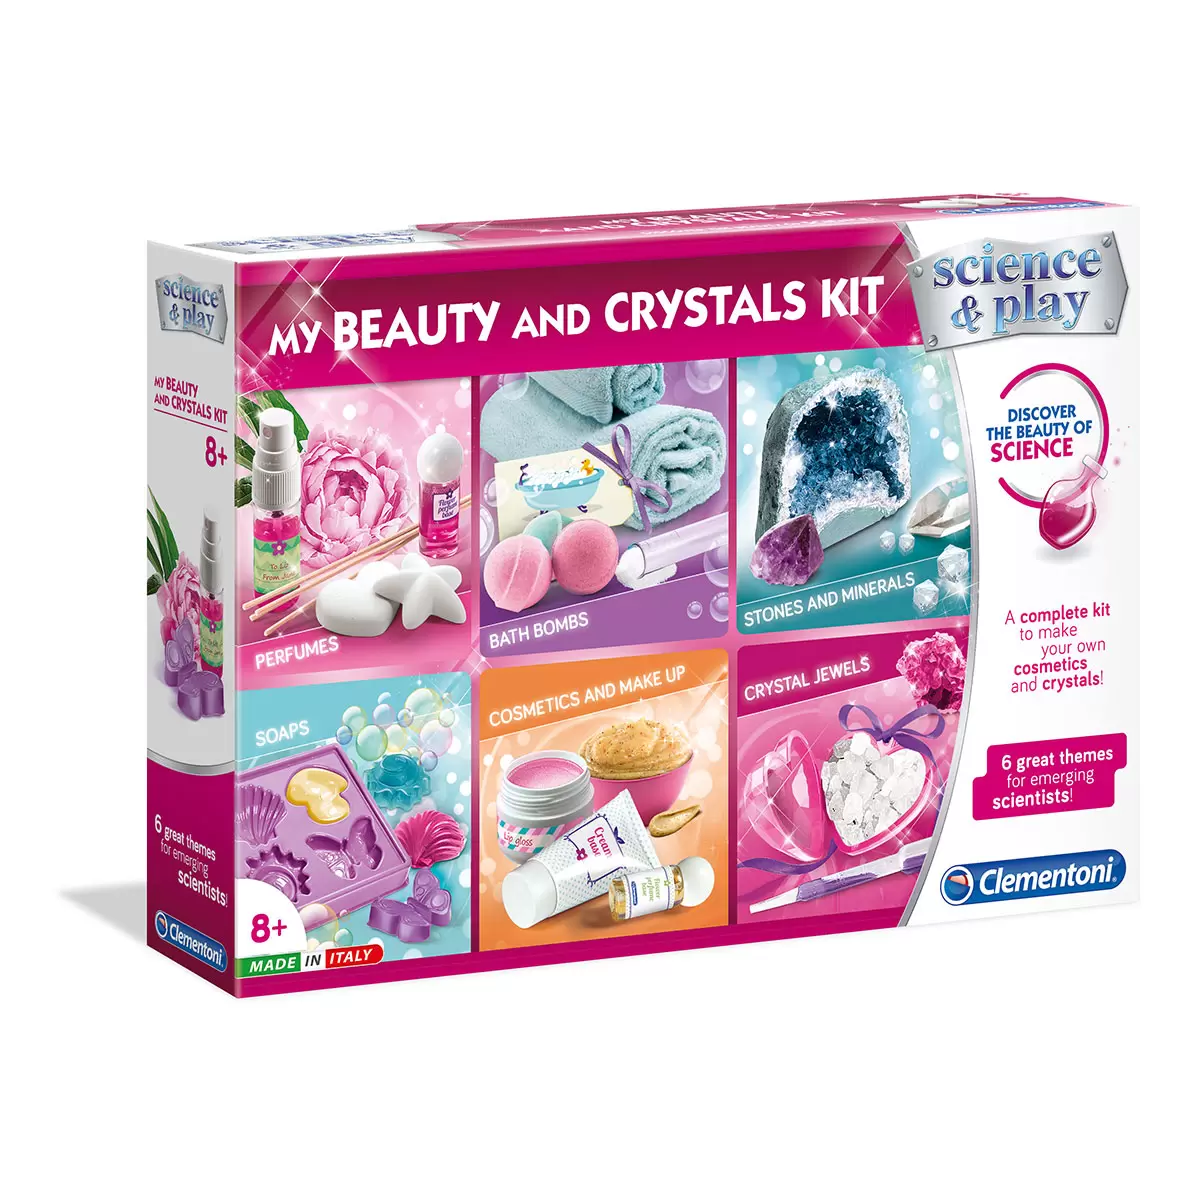 Buy 6-in-1 My Beauty & Crystals Kit Box Image at Costco.co.uk